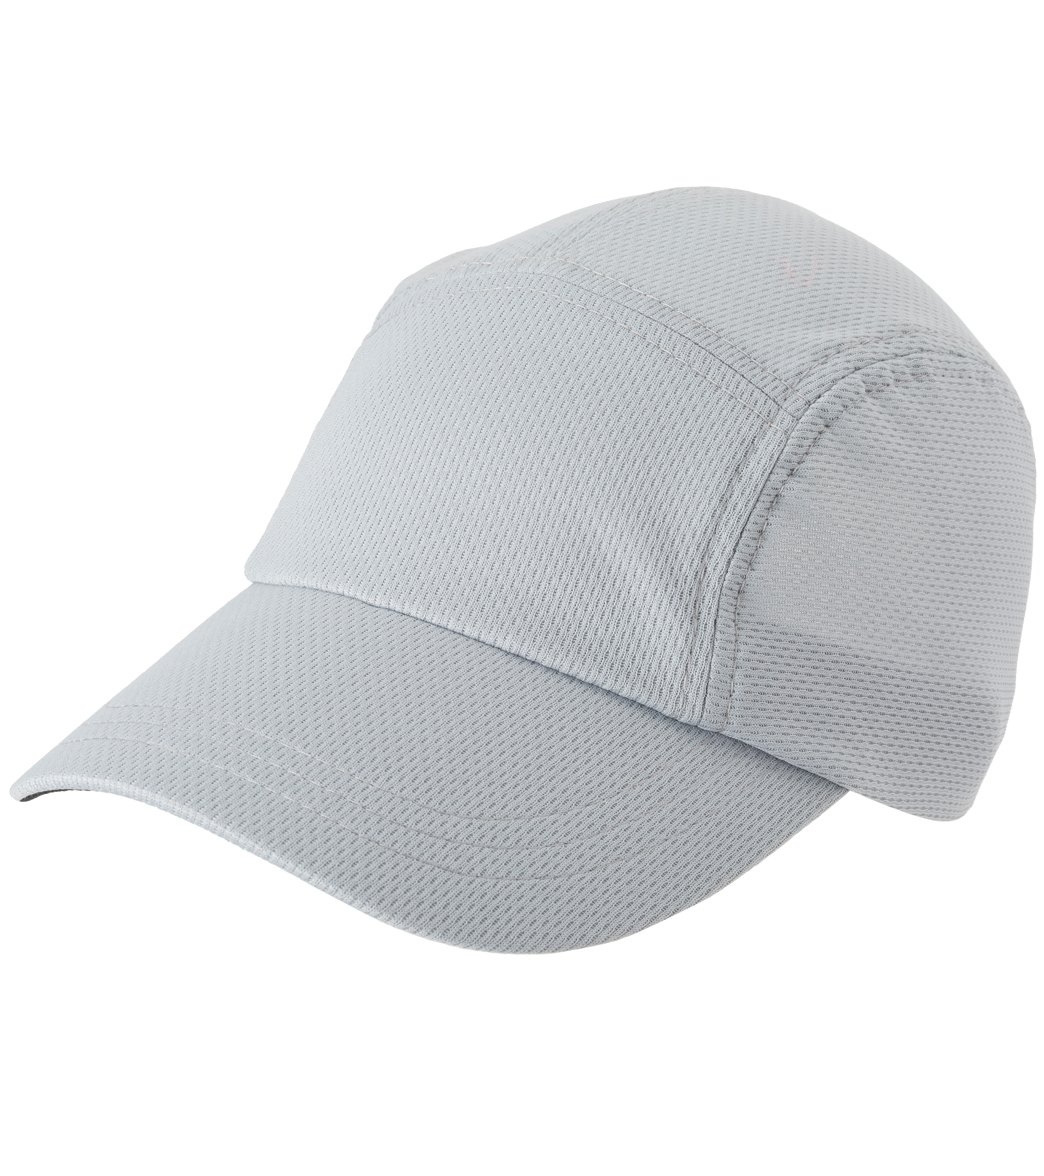 Headsweats Classic Race Hat - Grey Adjustable Polyester - Swimoutlet.com